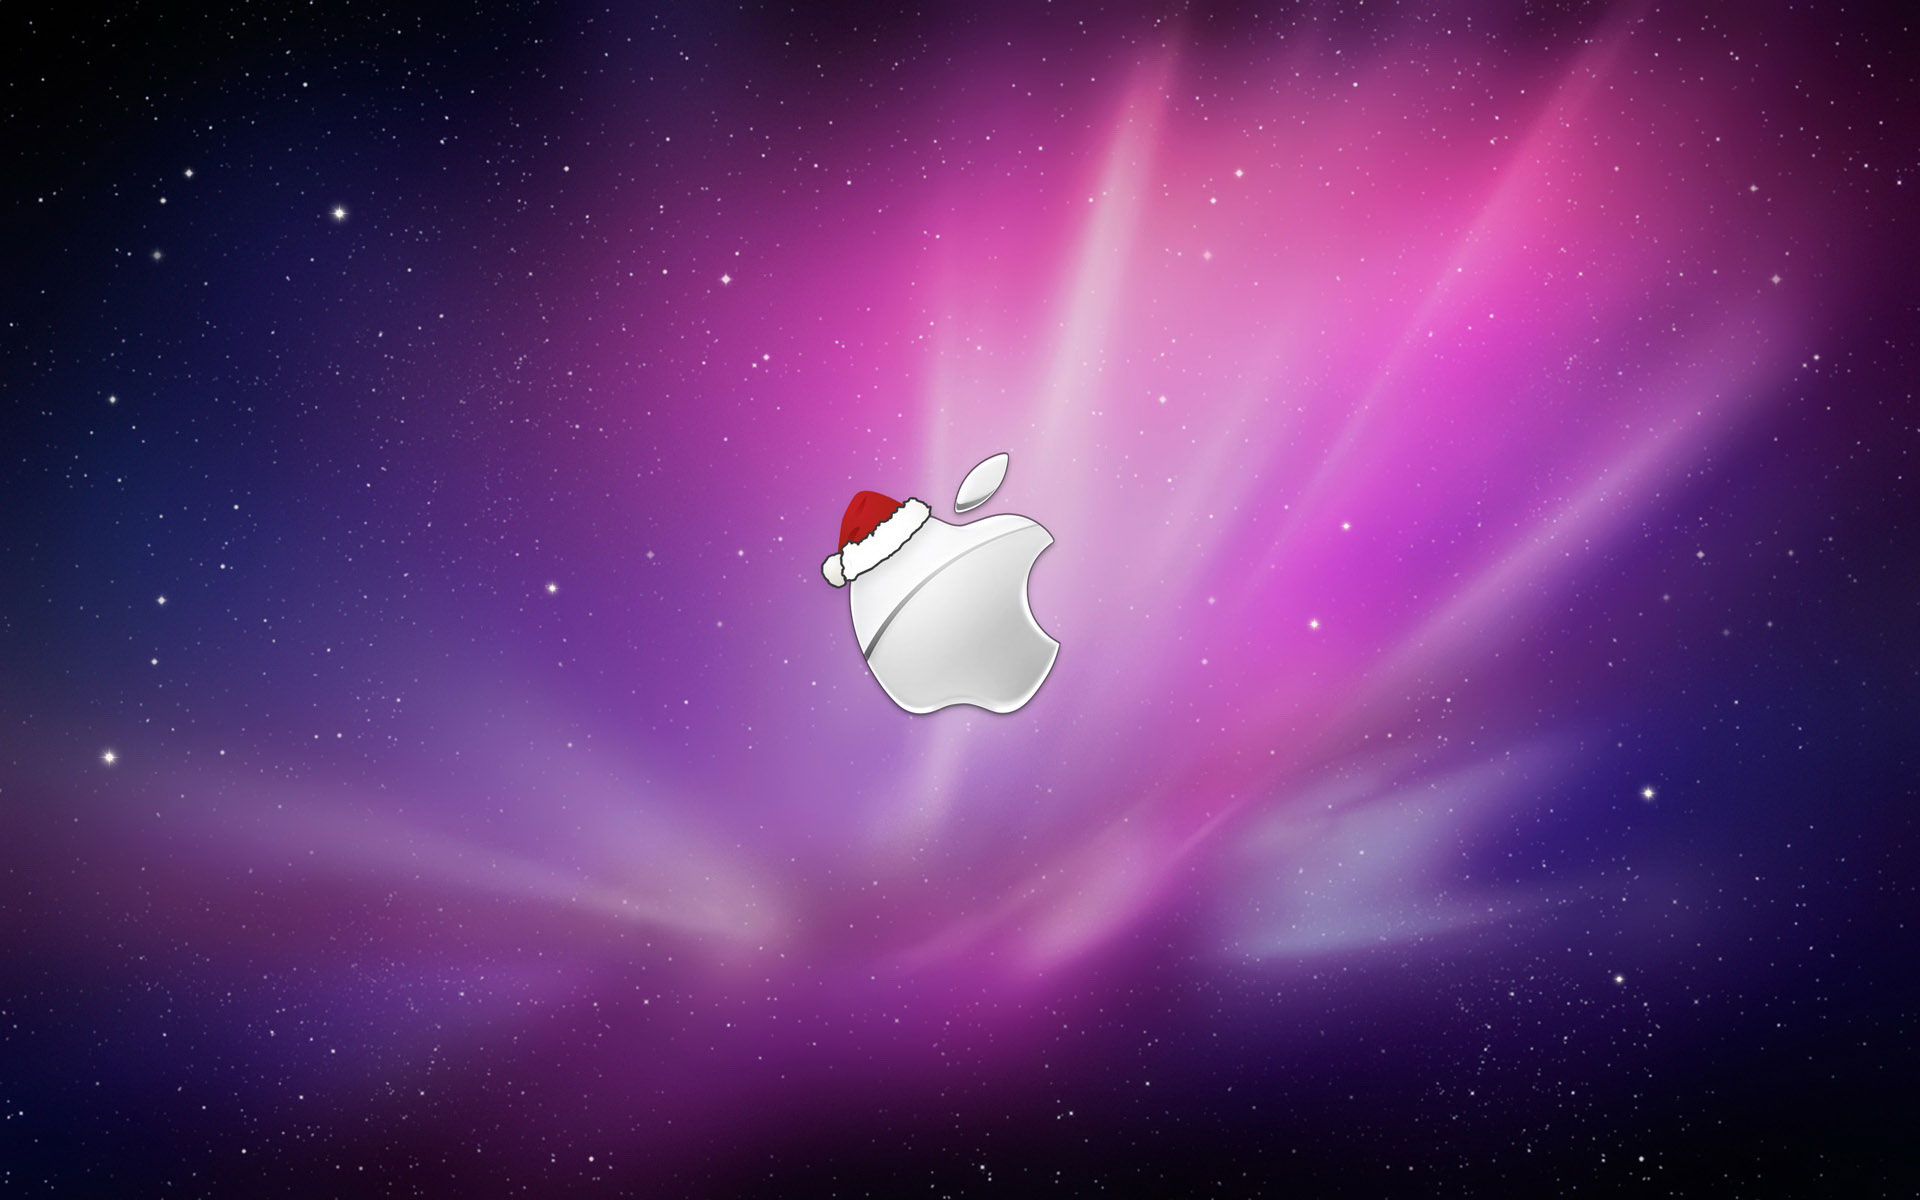 Apple Wallpaper HD Wallpapers, Backgrounds, Images, Art Photos